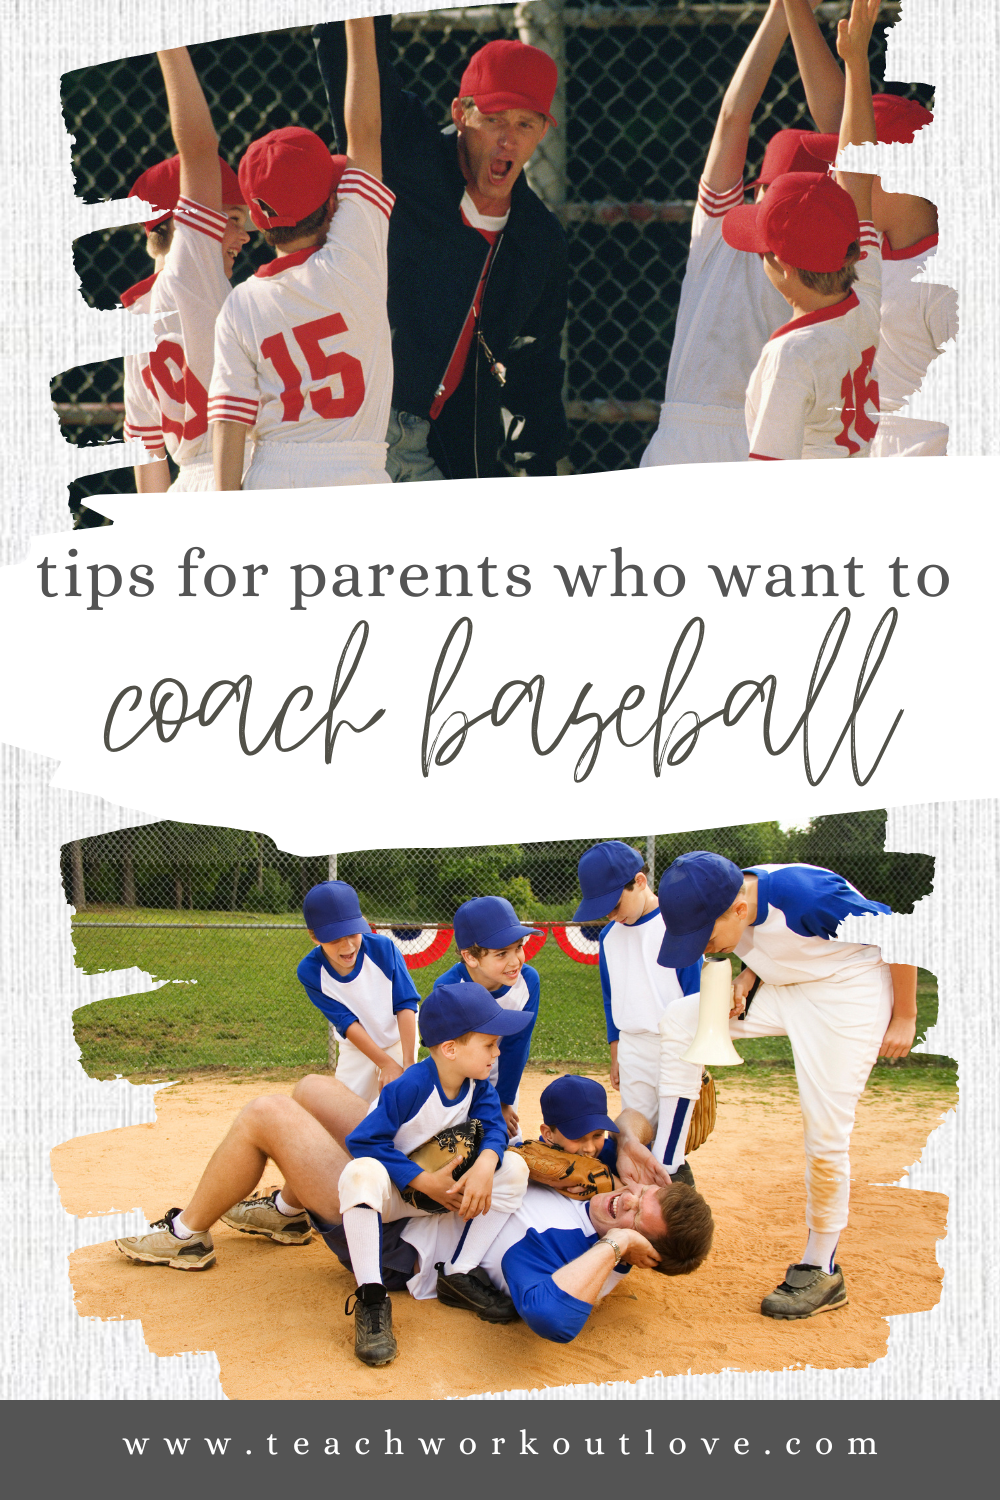 Children deserve a fun time no matter what game they're playing, and as their parents and their coach you are responsible for that happening. With that in mind, here are some simple guidelines that you might find helpful for your kids next baseball tournament.